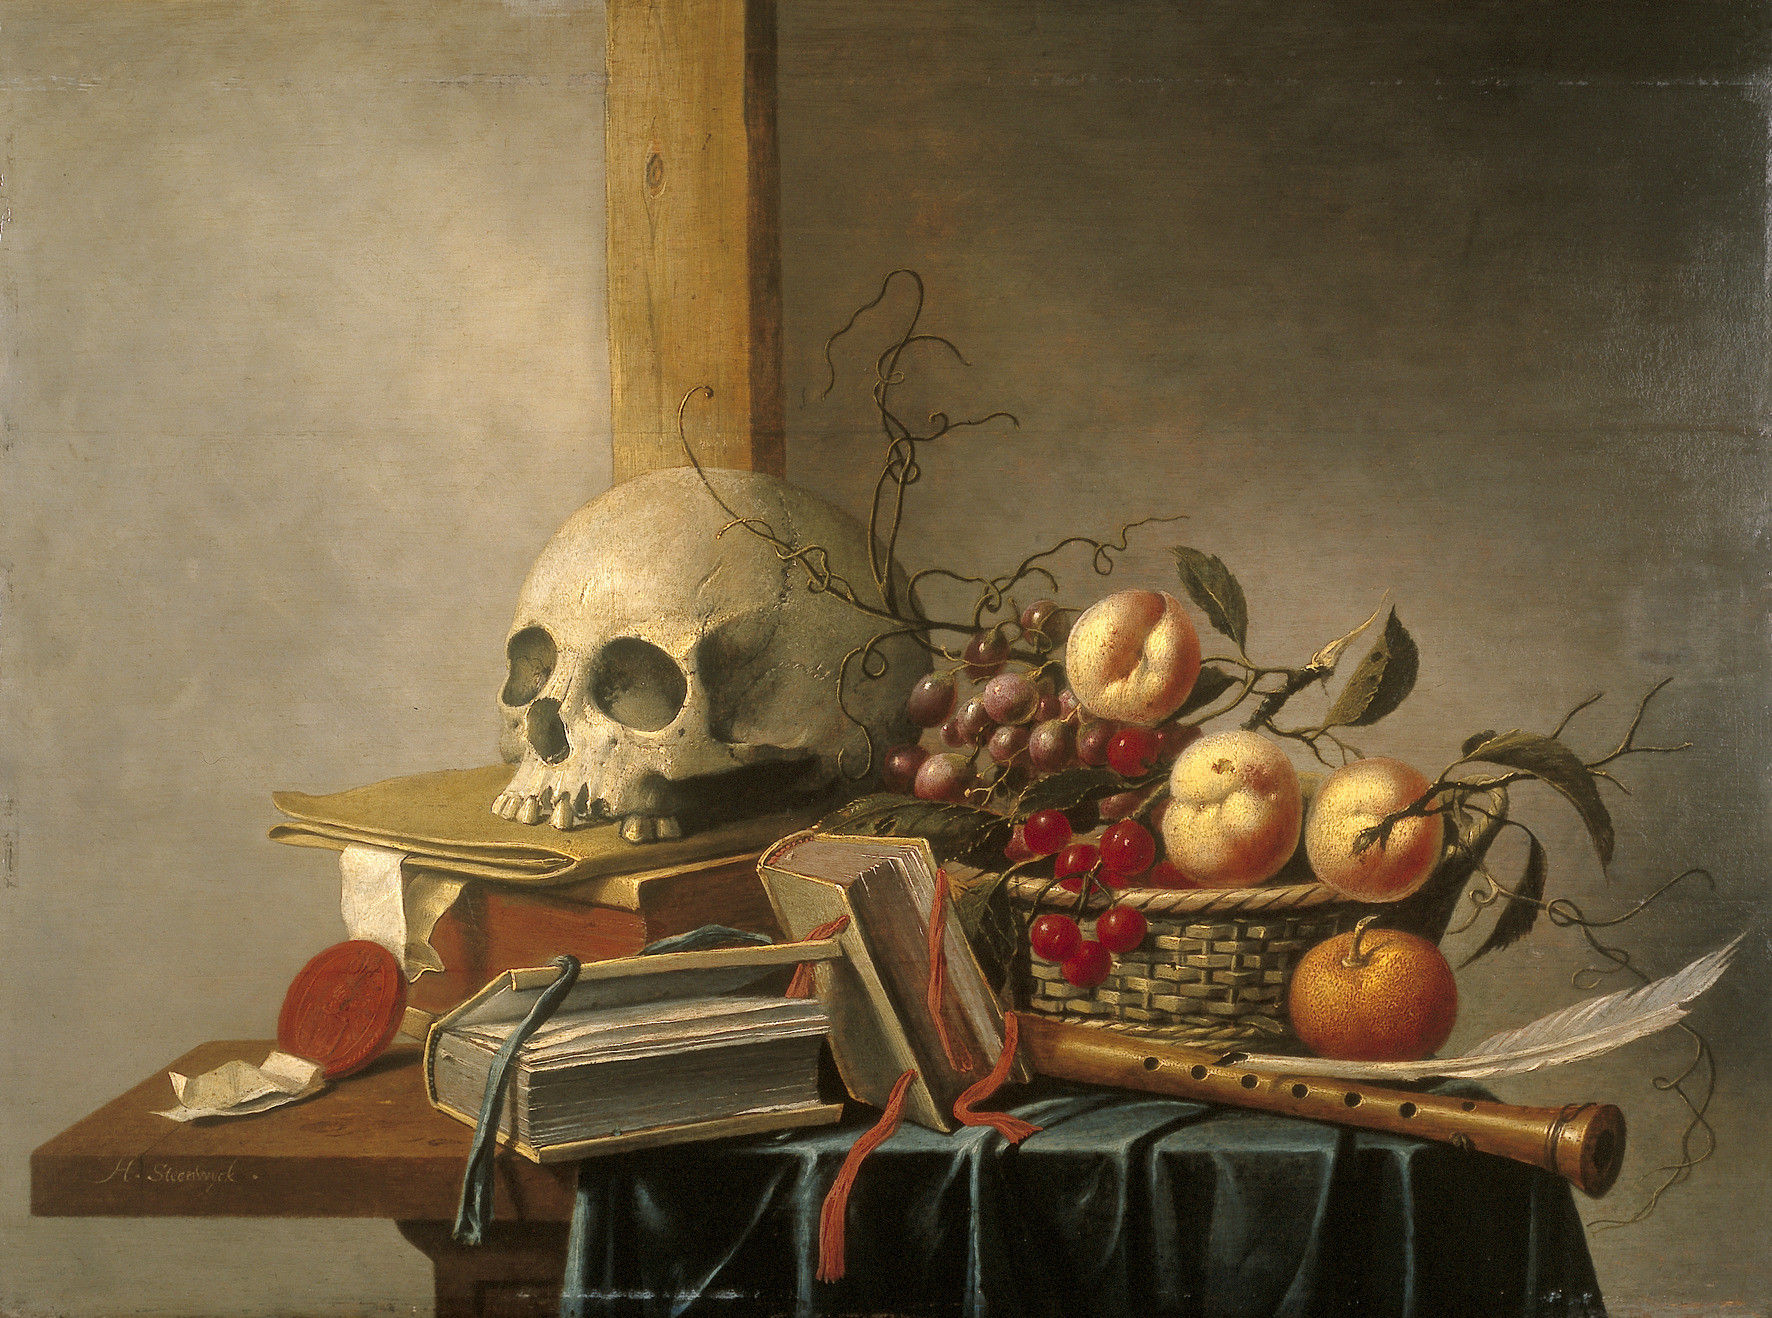 Example of a typical 'vanitas still life' with various symbols by Harmen Steenwijck, ca 1628